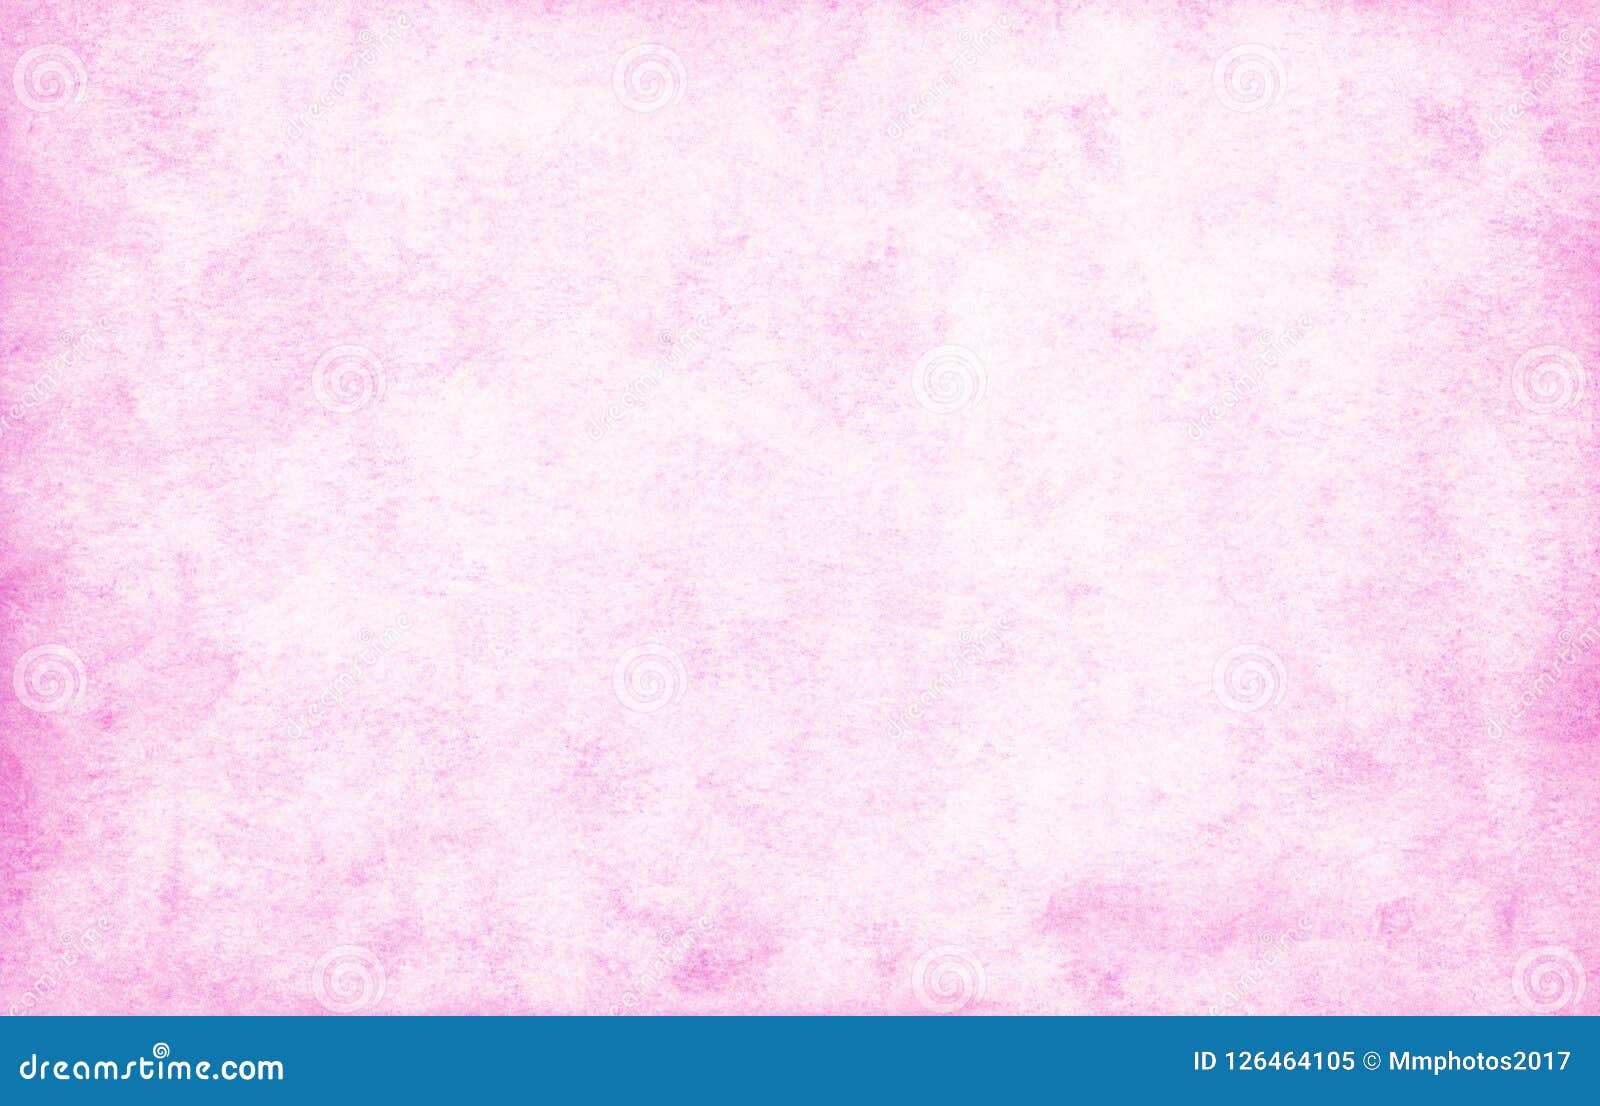 Pink Paper Texture Background Stock Image - Image of frame, color ...